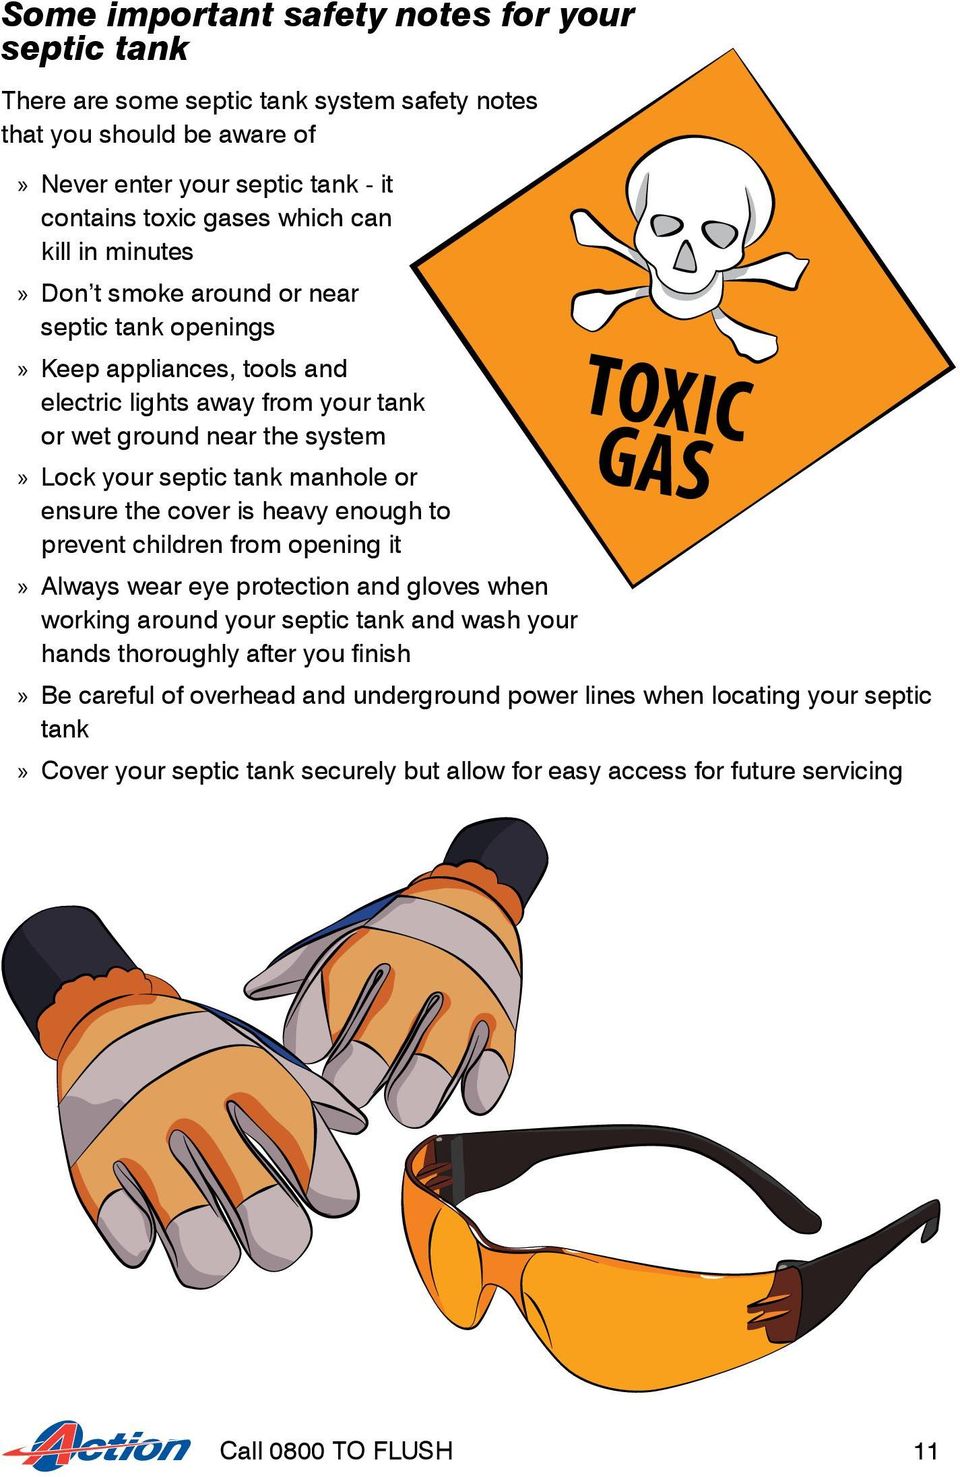 ensure the cover is heavy enough to prevent children from opening it TOXIC GAS Always wear eye protection and gloves when working around your septic tank and wash your hands thoroughly after